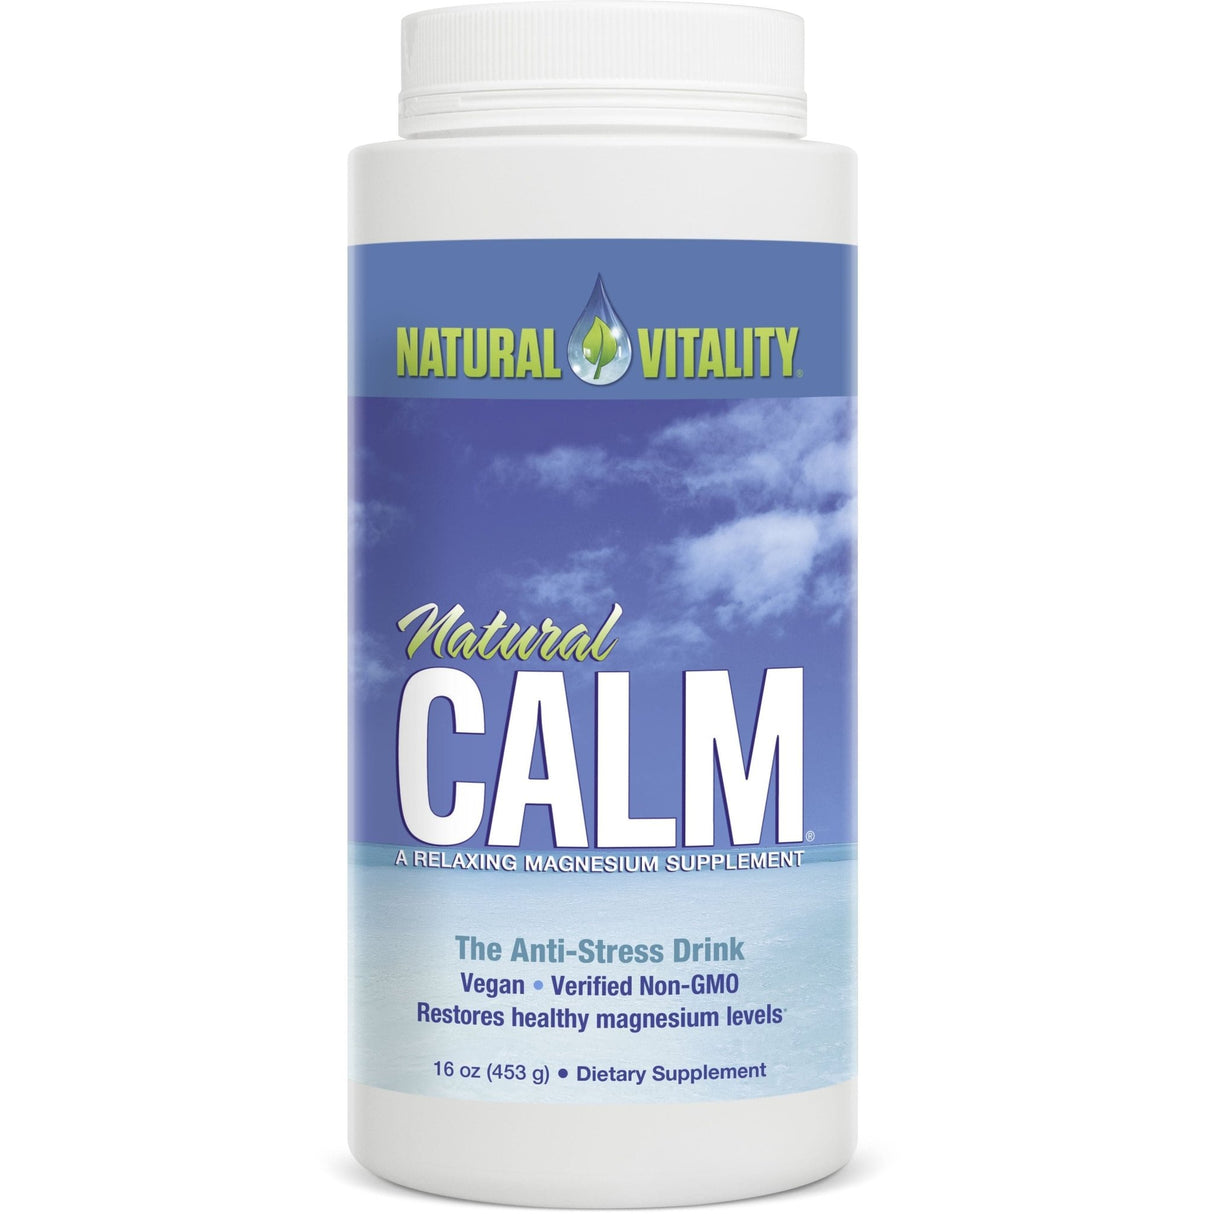 Witaminy i suplementy diety Natural Vitality Natural Calm 453 g Unflavored - Sklep Witaminki.pl